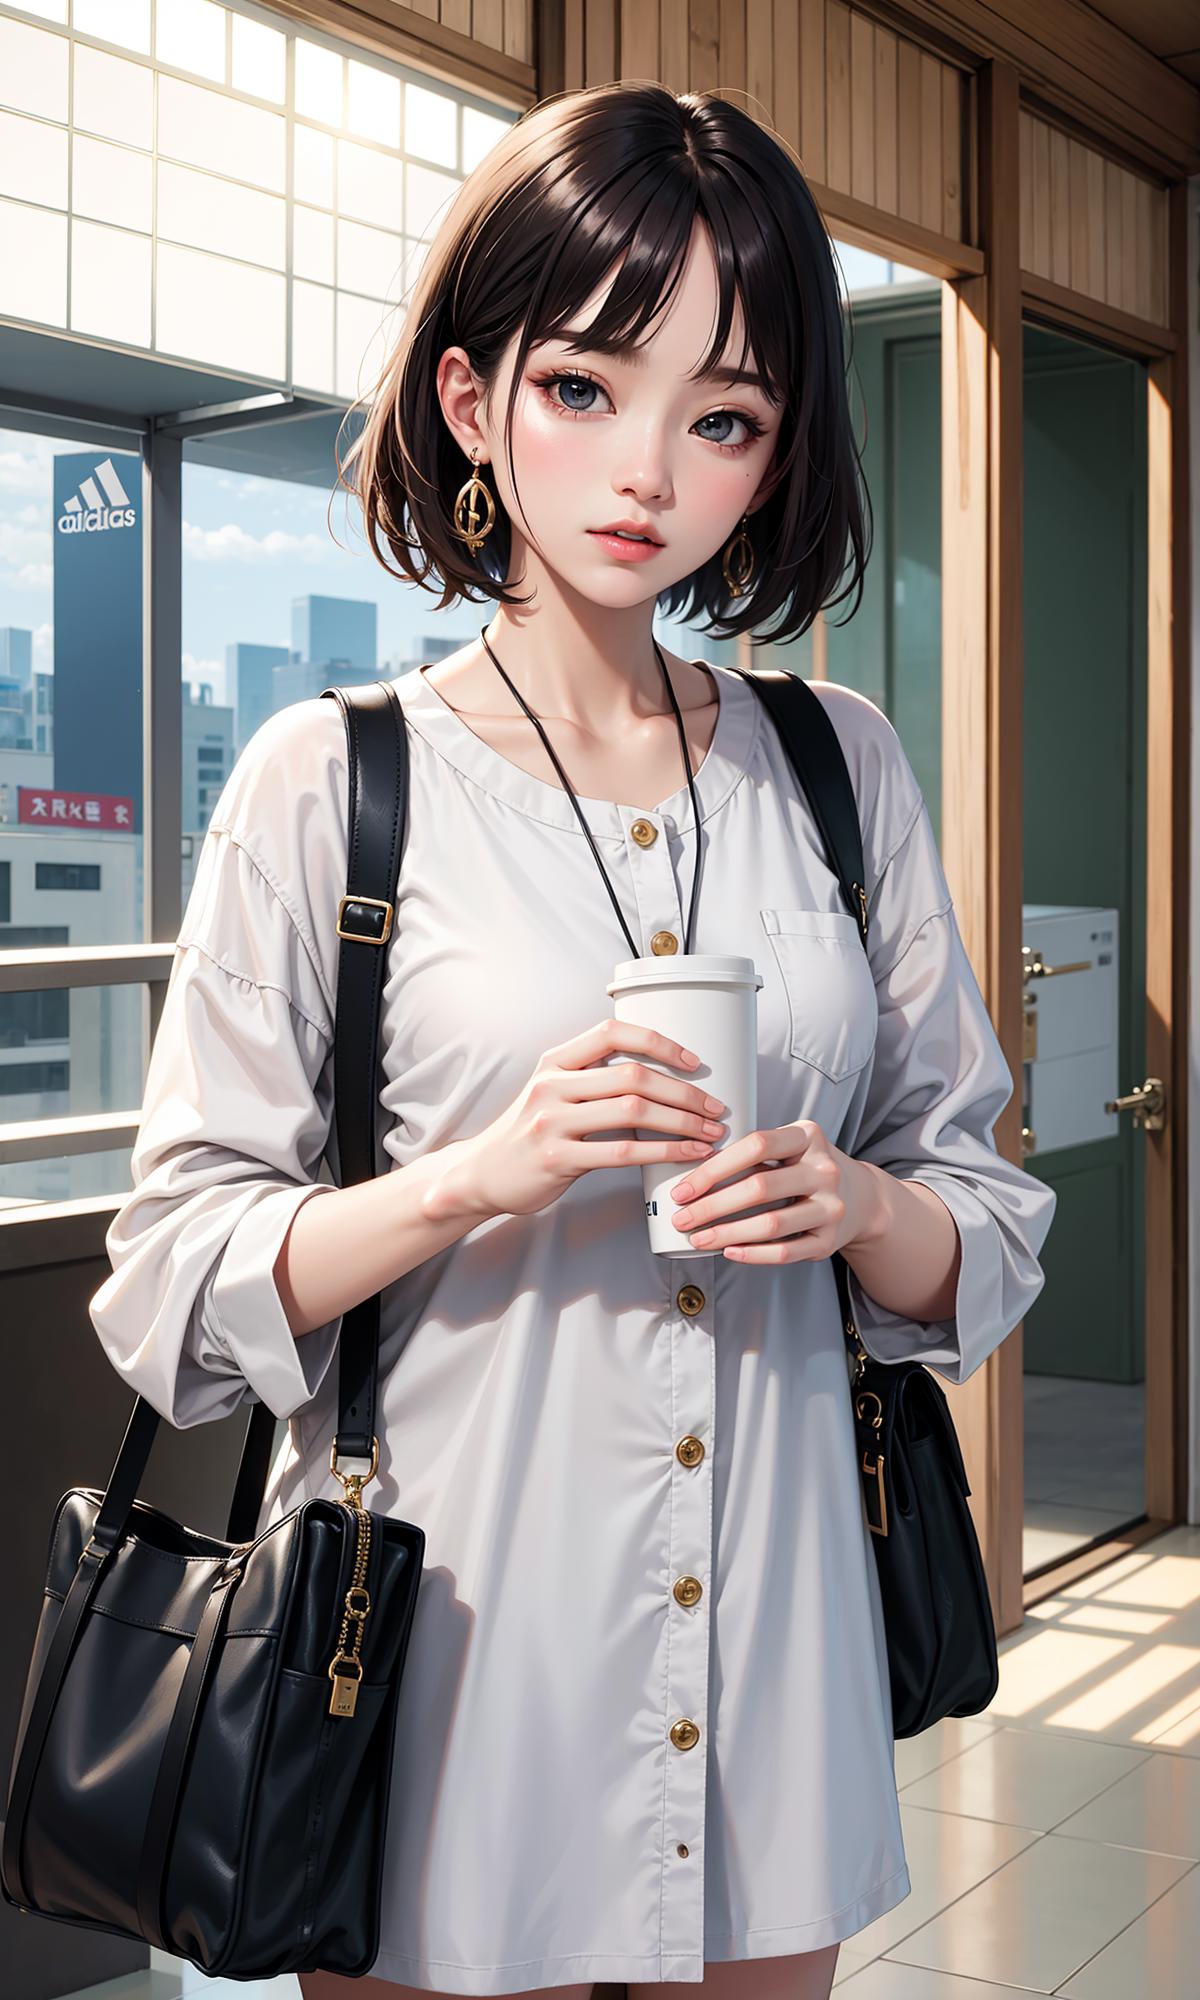 AI model image by a278794930961